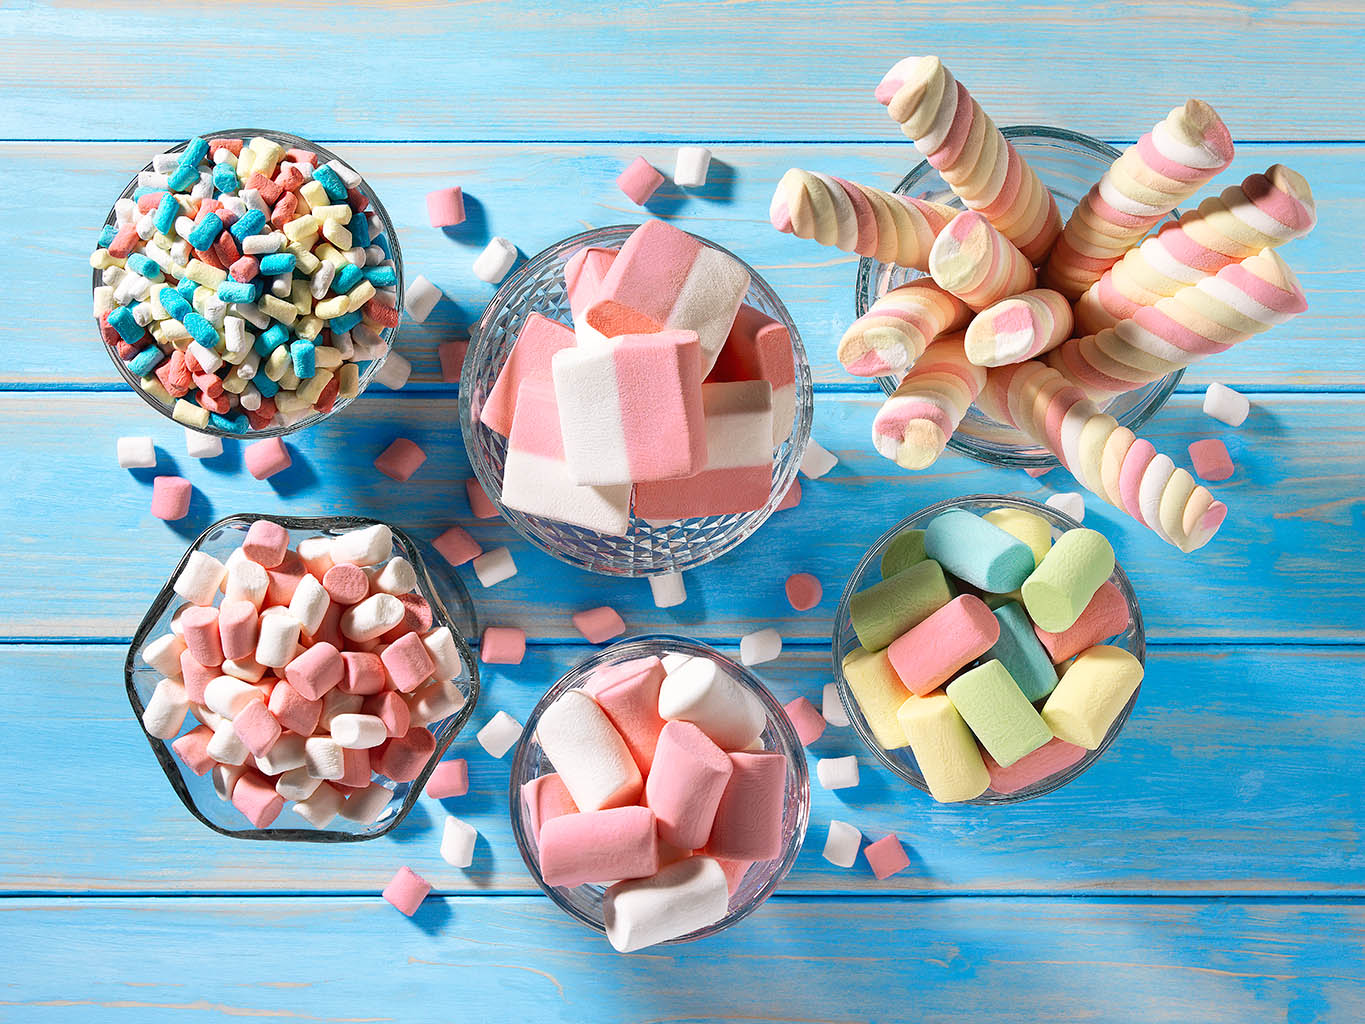 Food Photography of Marshmallows by Packshot Factory